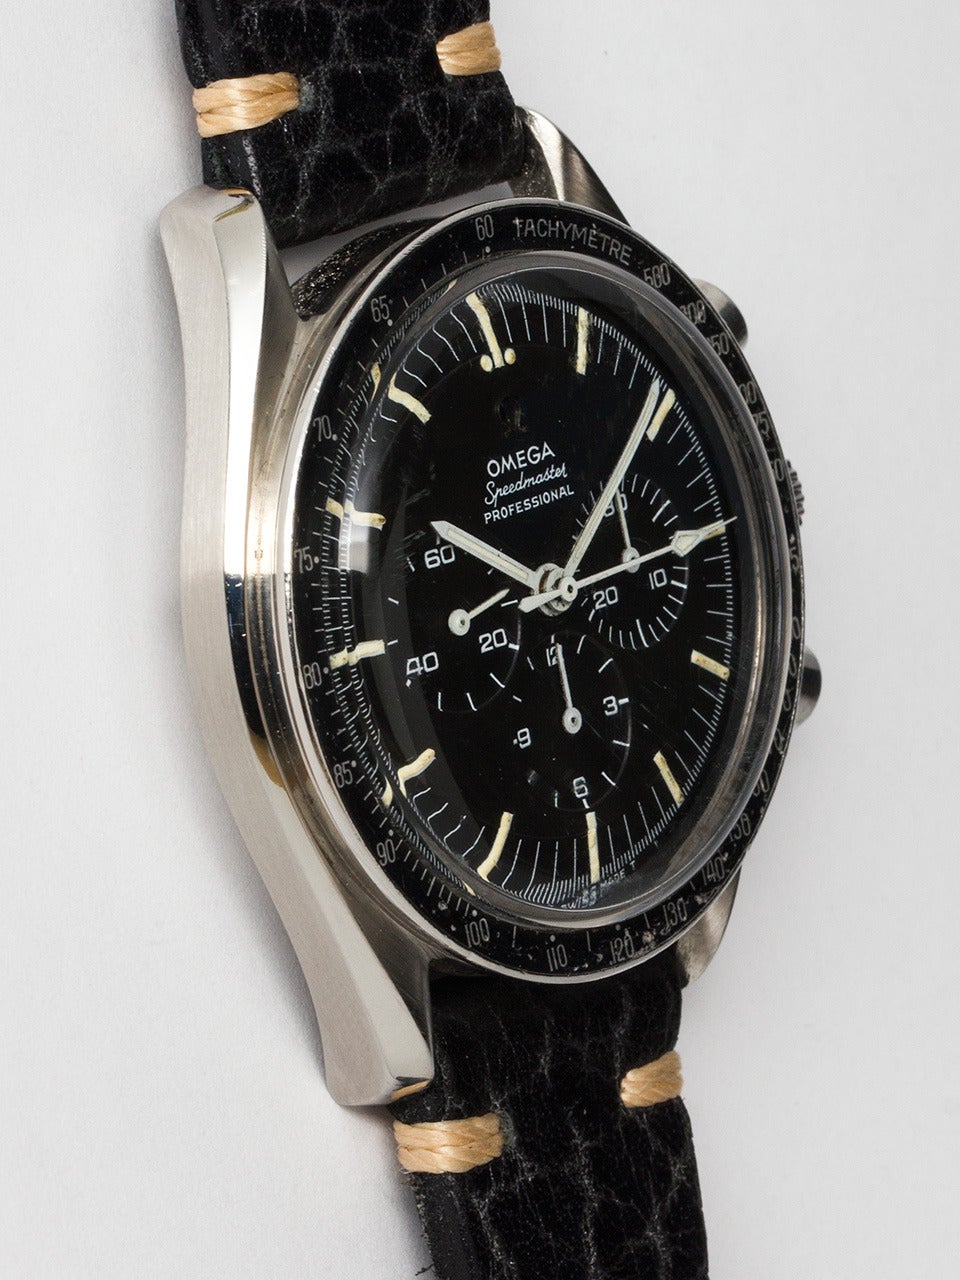 Omega Speedmaster Professional Wristwatch, ref 145.012-67 circa 1967. This is a pre Man on the Moon model. Case measuring 42mm diameter with original black tachymetre bezel. Very pleasing original matte black stepped dial with lightly patina'd